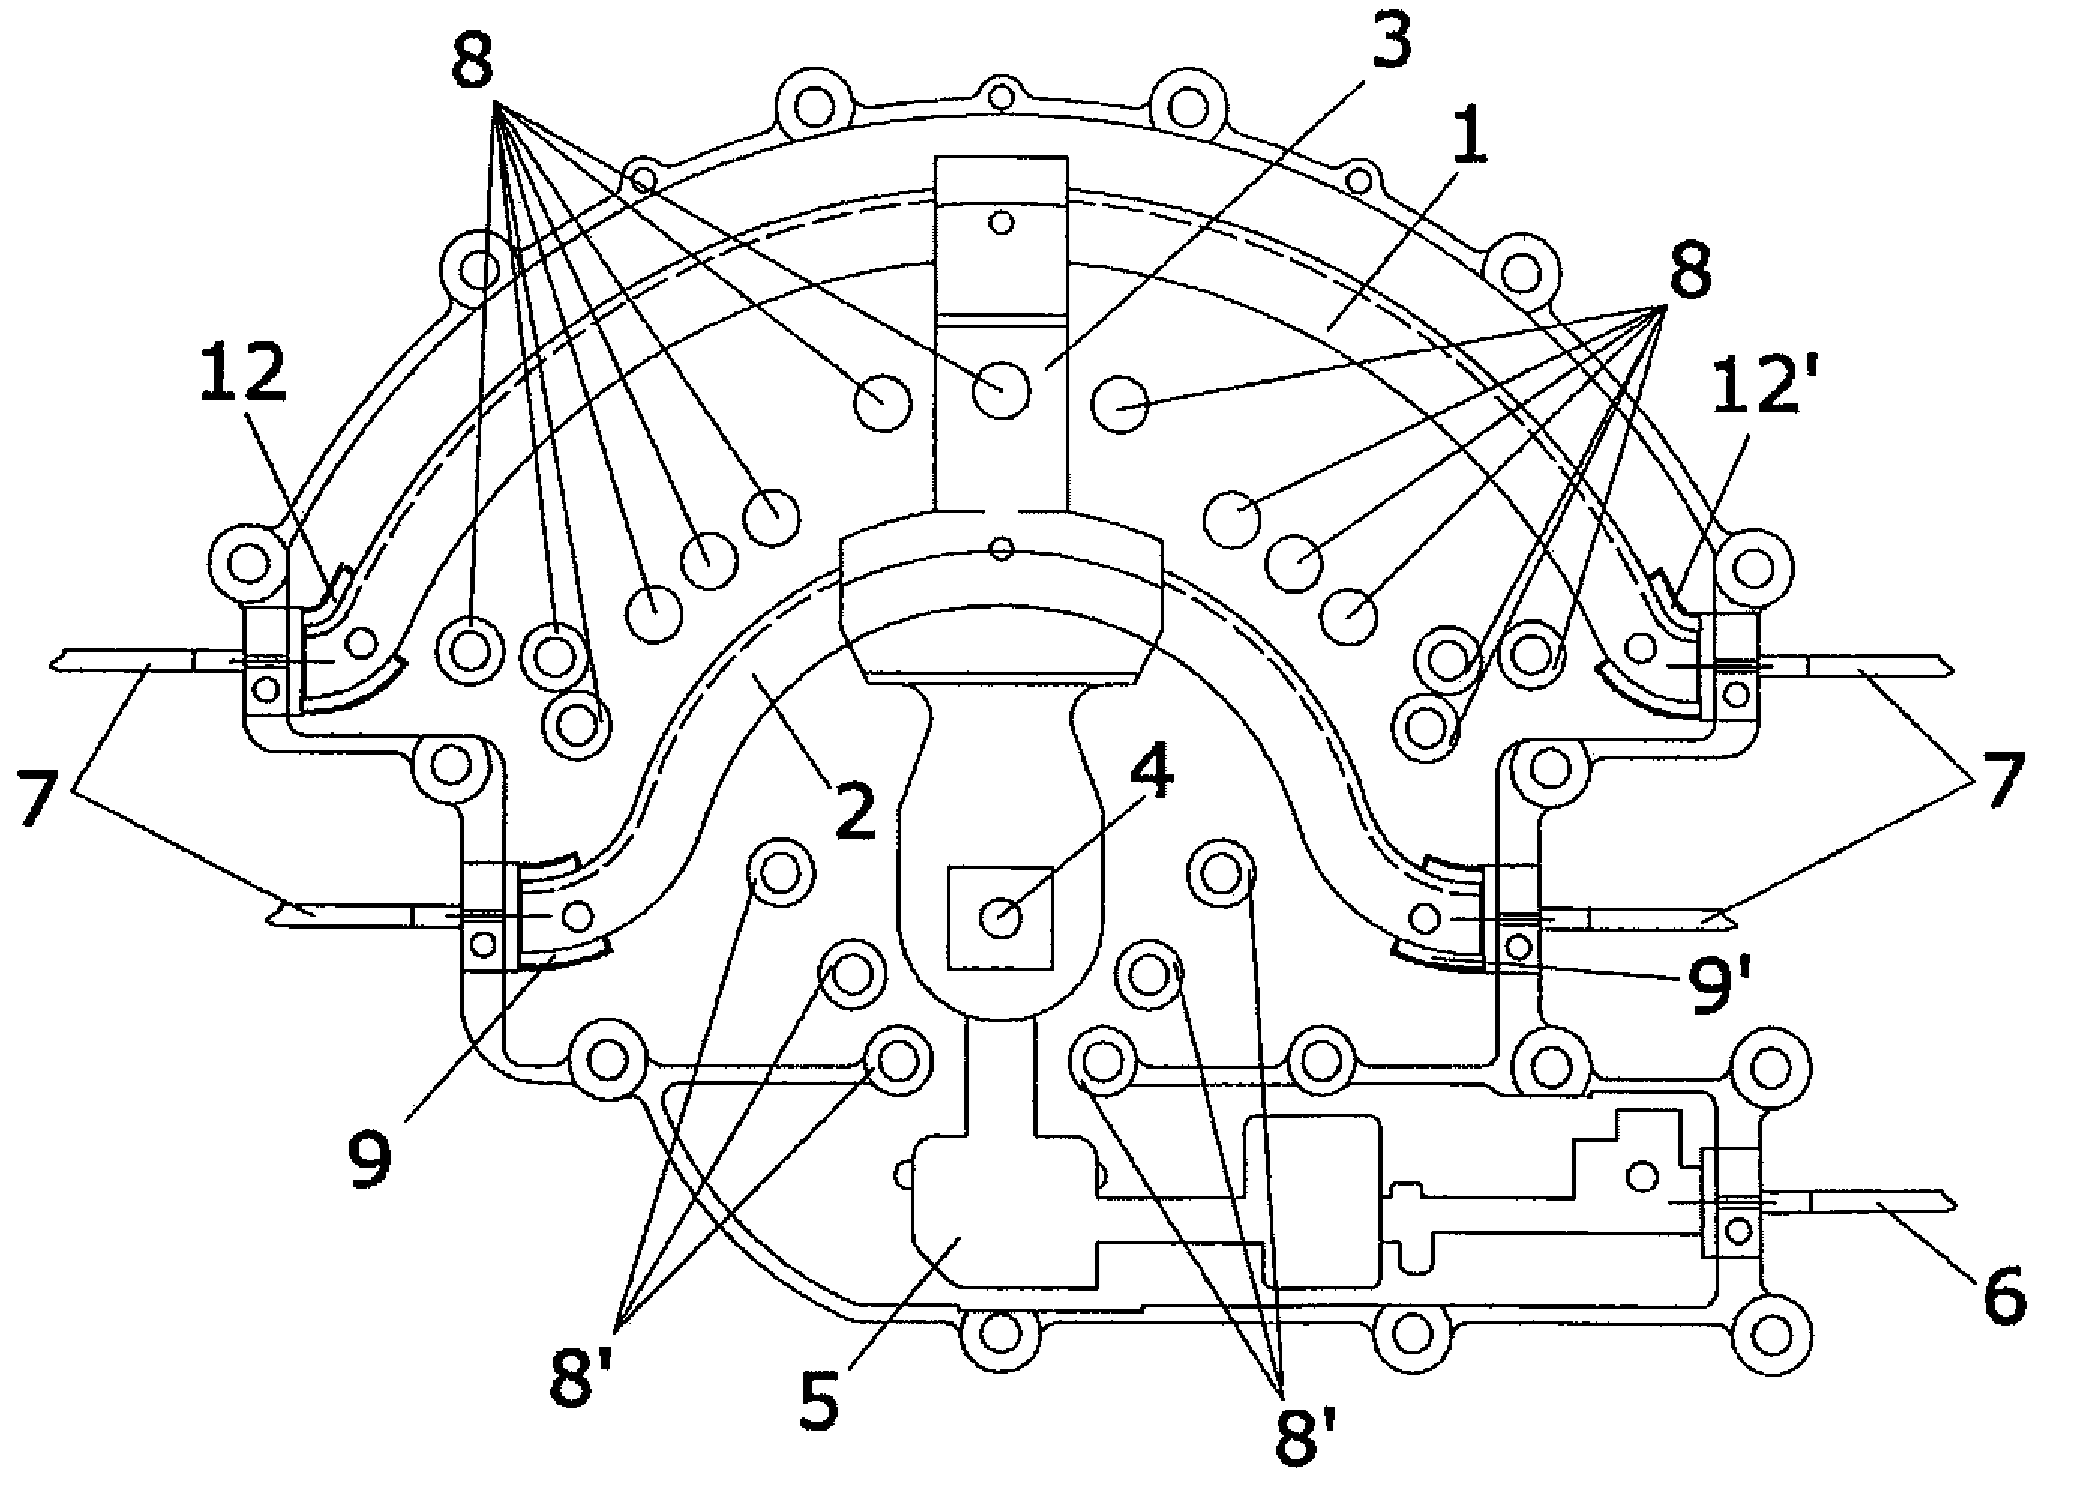 Broad band mechanical phase shifter